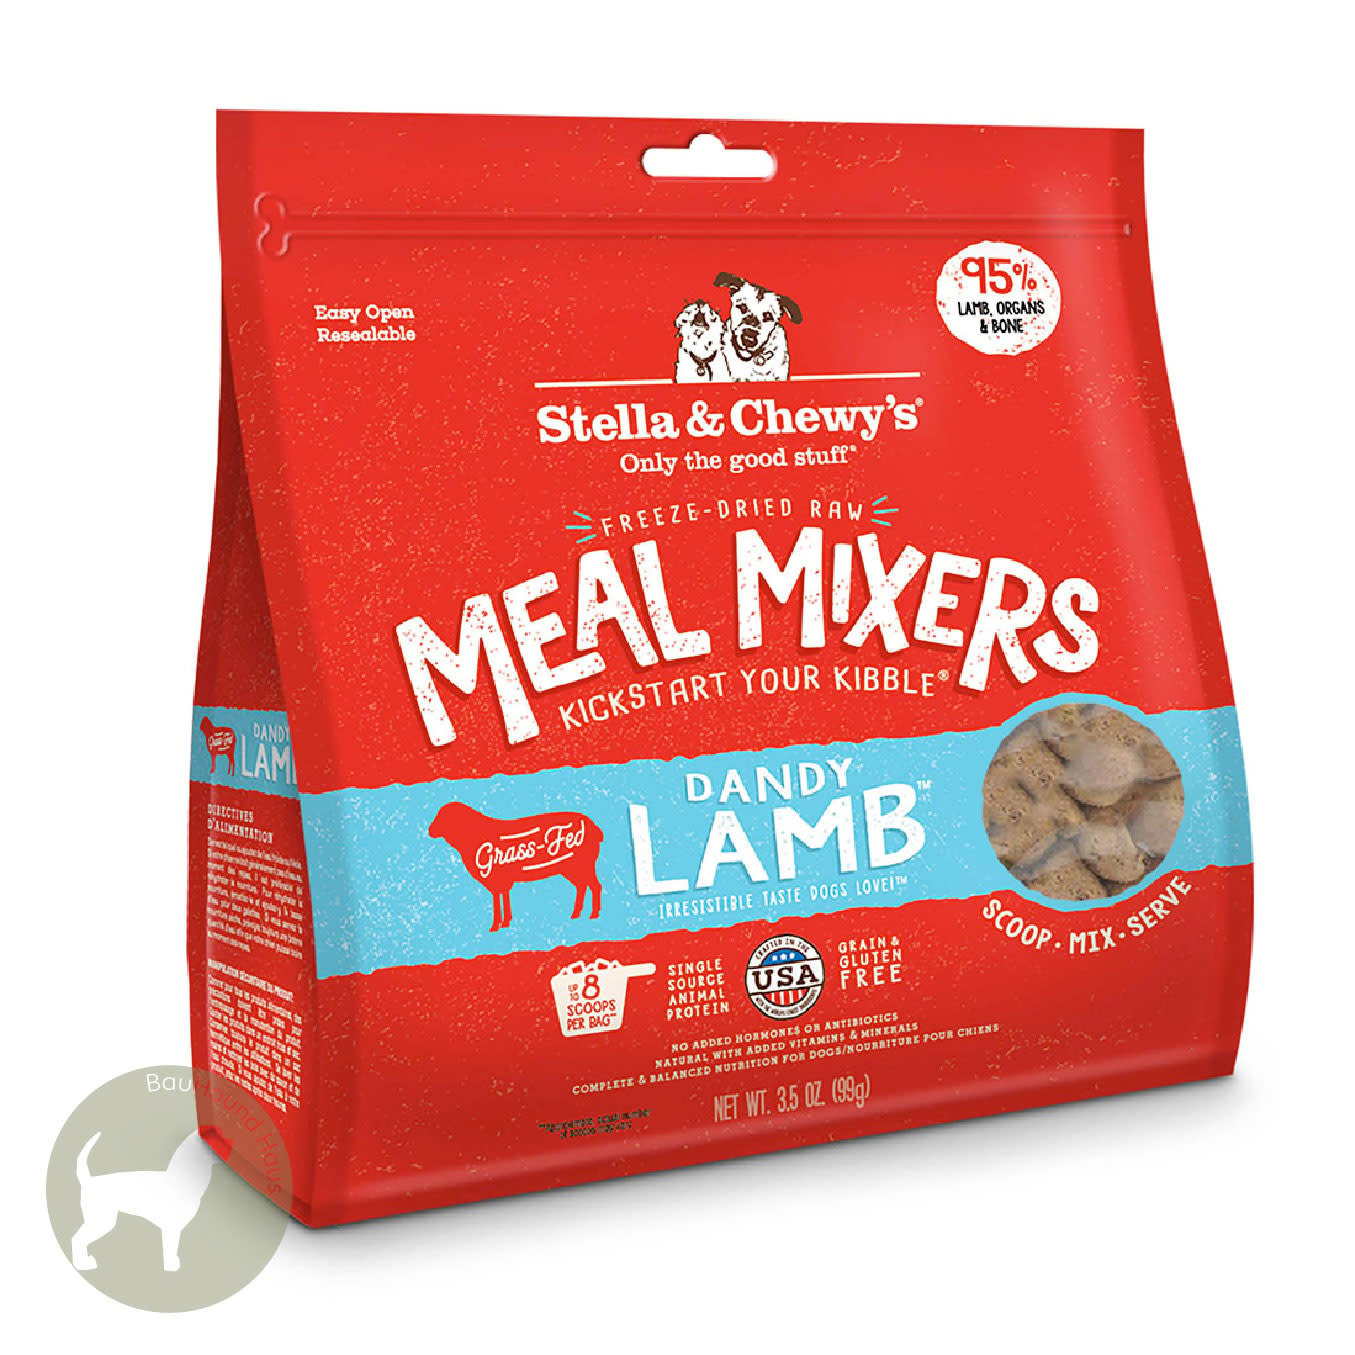 Stella & Chewy's Stella & Chewy's Meal Mixer Dandy Lamb 3.5oz